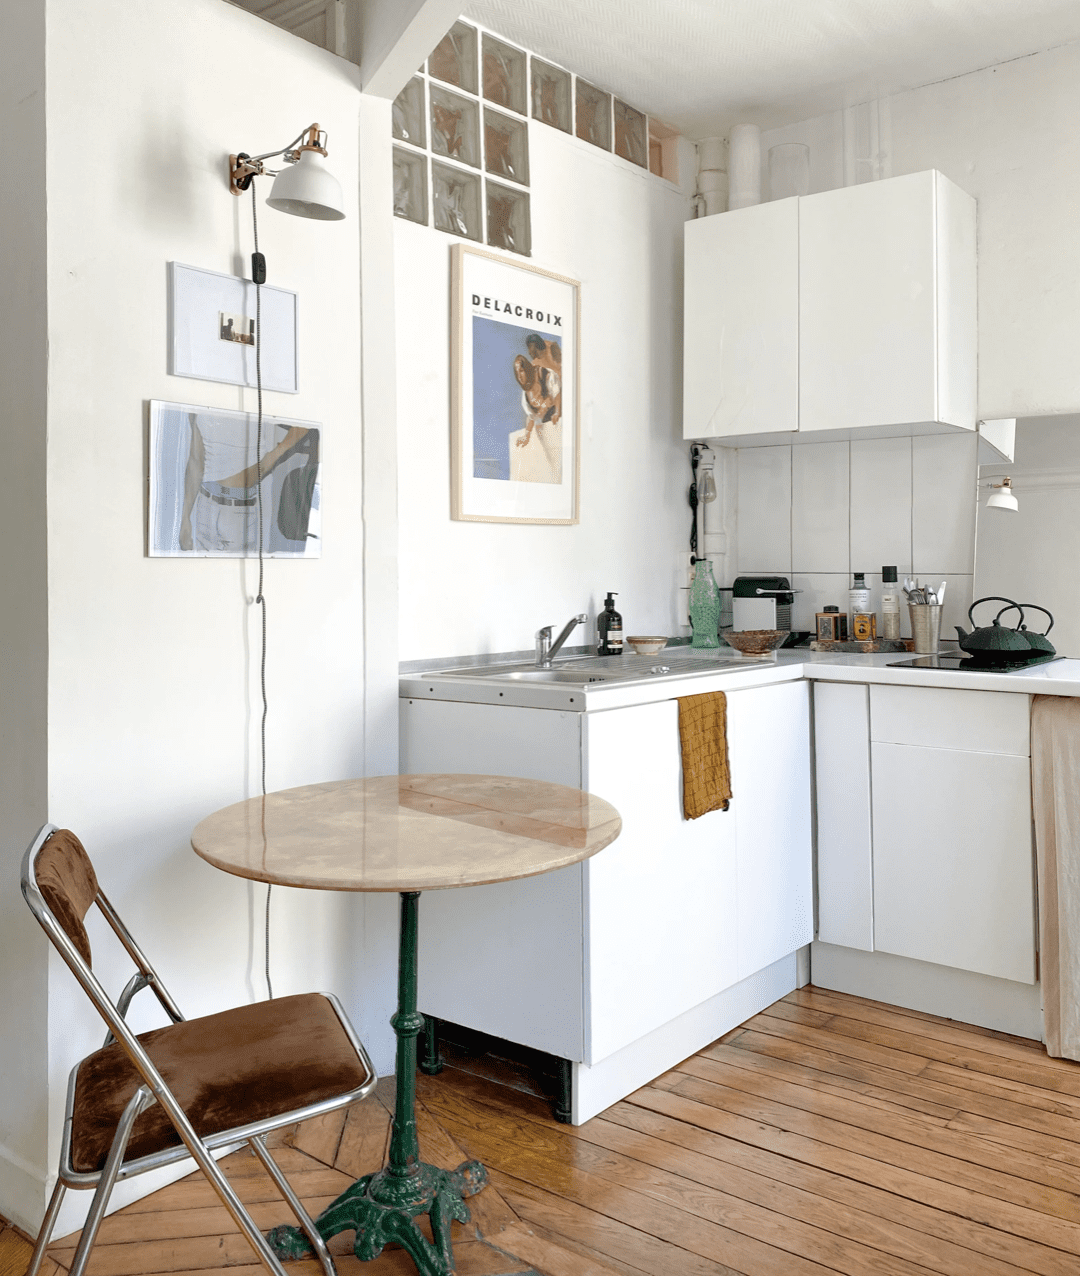 Best Small Kitchen Ideas for Apartment Living - Tiara L. Cole - Top Atlanta  Fashion and Home Decor Blog